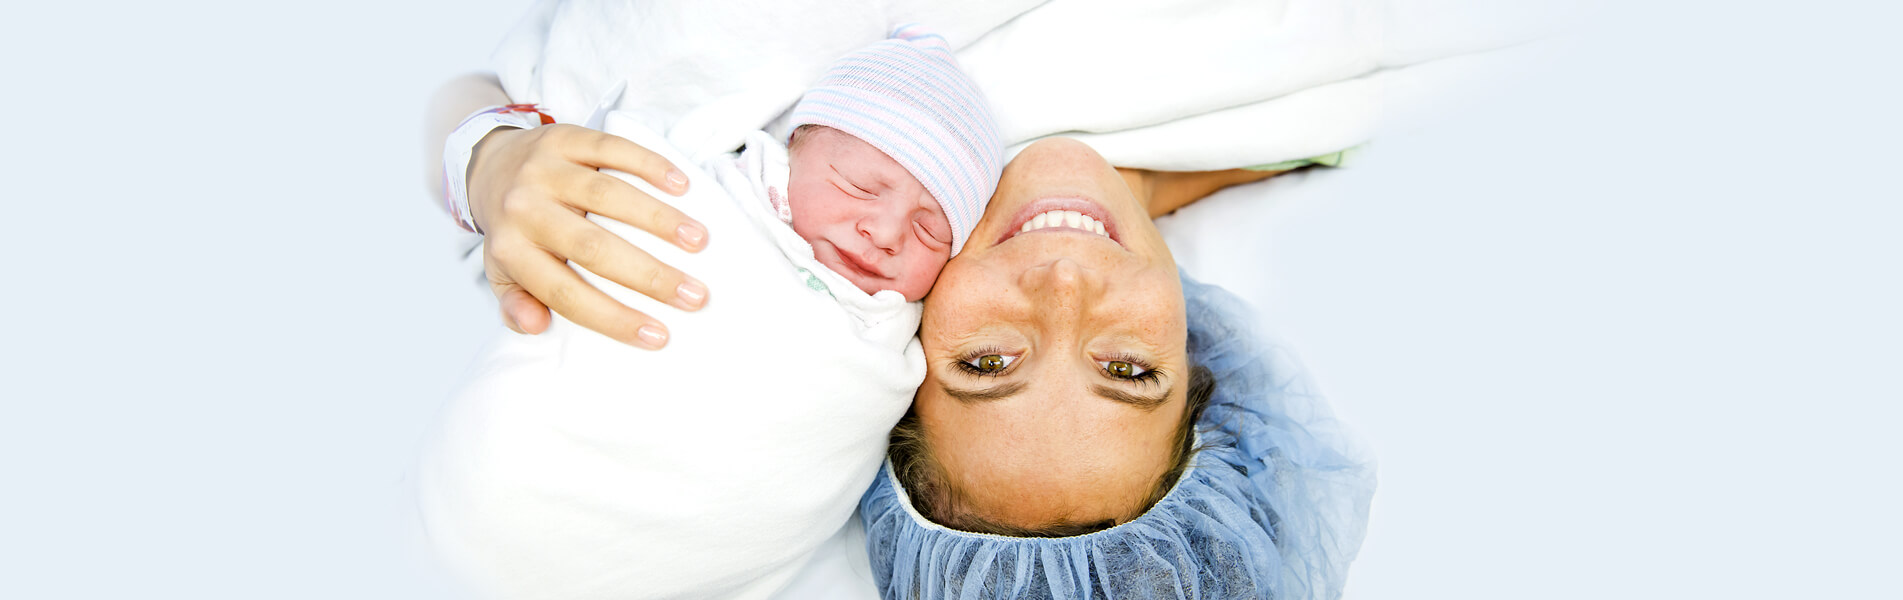 Mum and baby after caesarean section